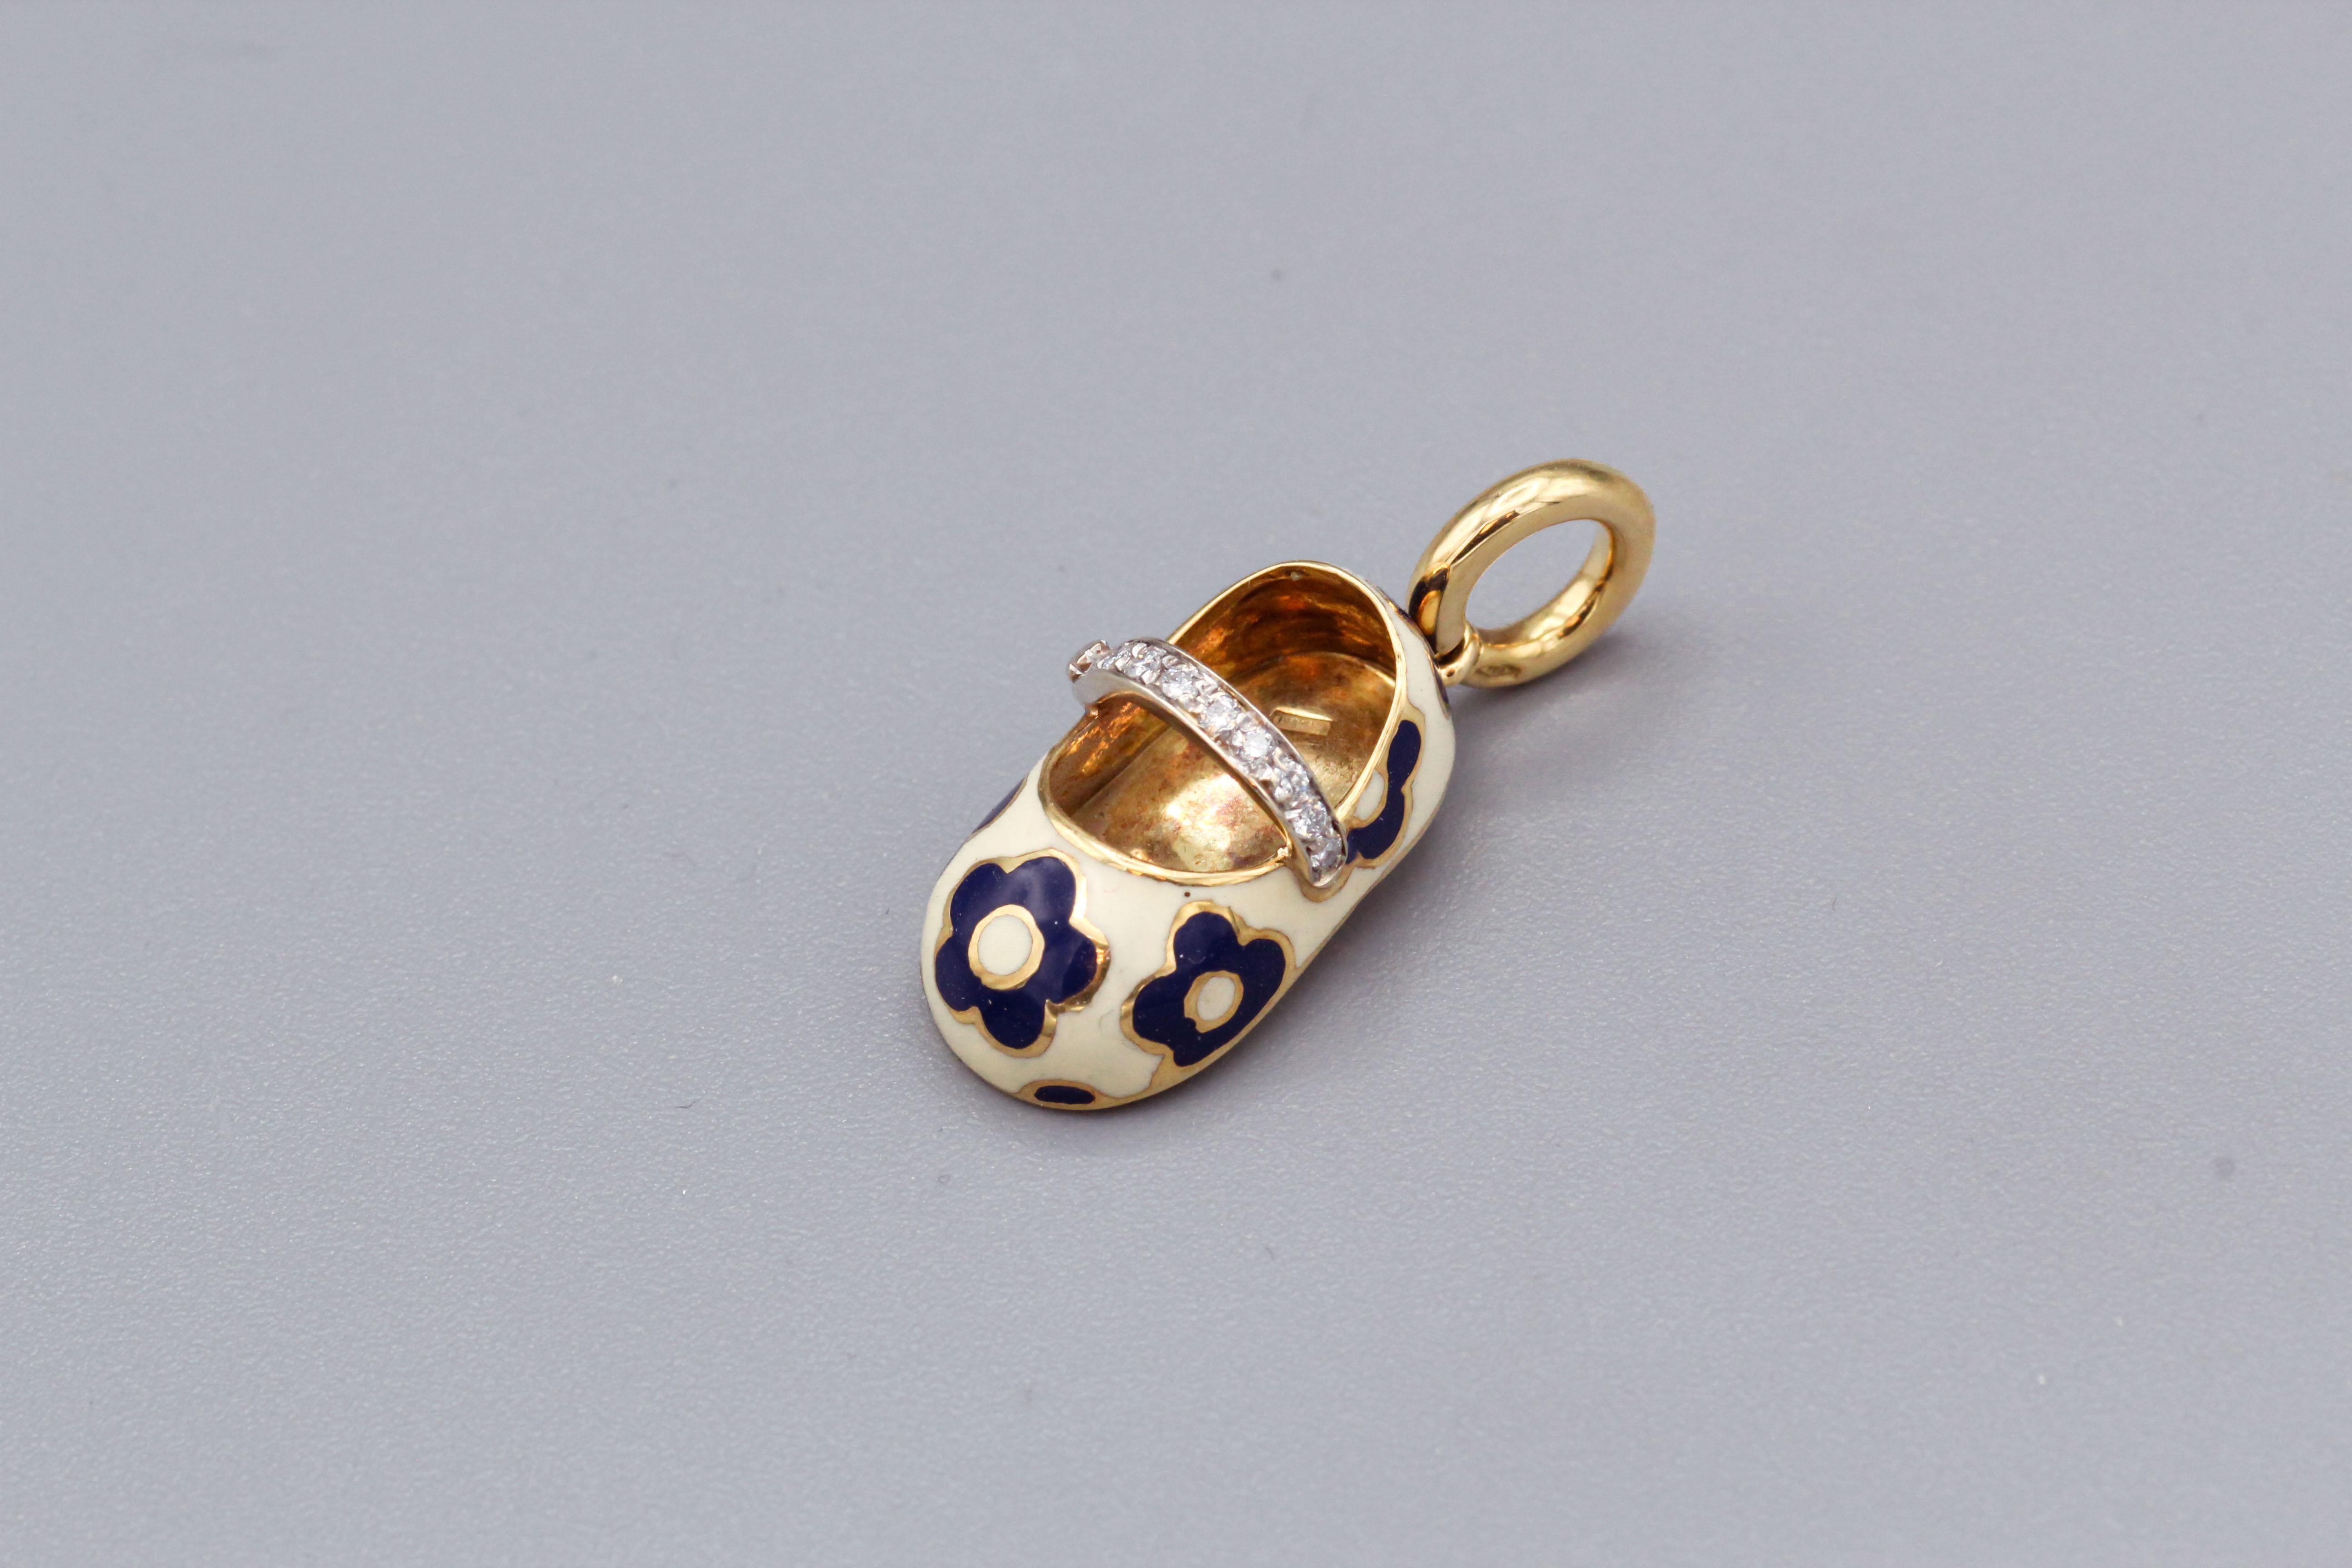 This fine Aaron Basha baby shoe charm in 18k gold with enamel is a beautiful and intricate piece of jewelry that is designed to celebrate the birth of a child. This charm is small and delicate, measuring approx. 3/4